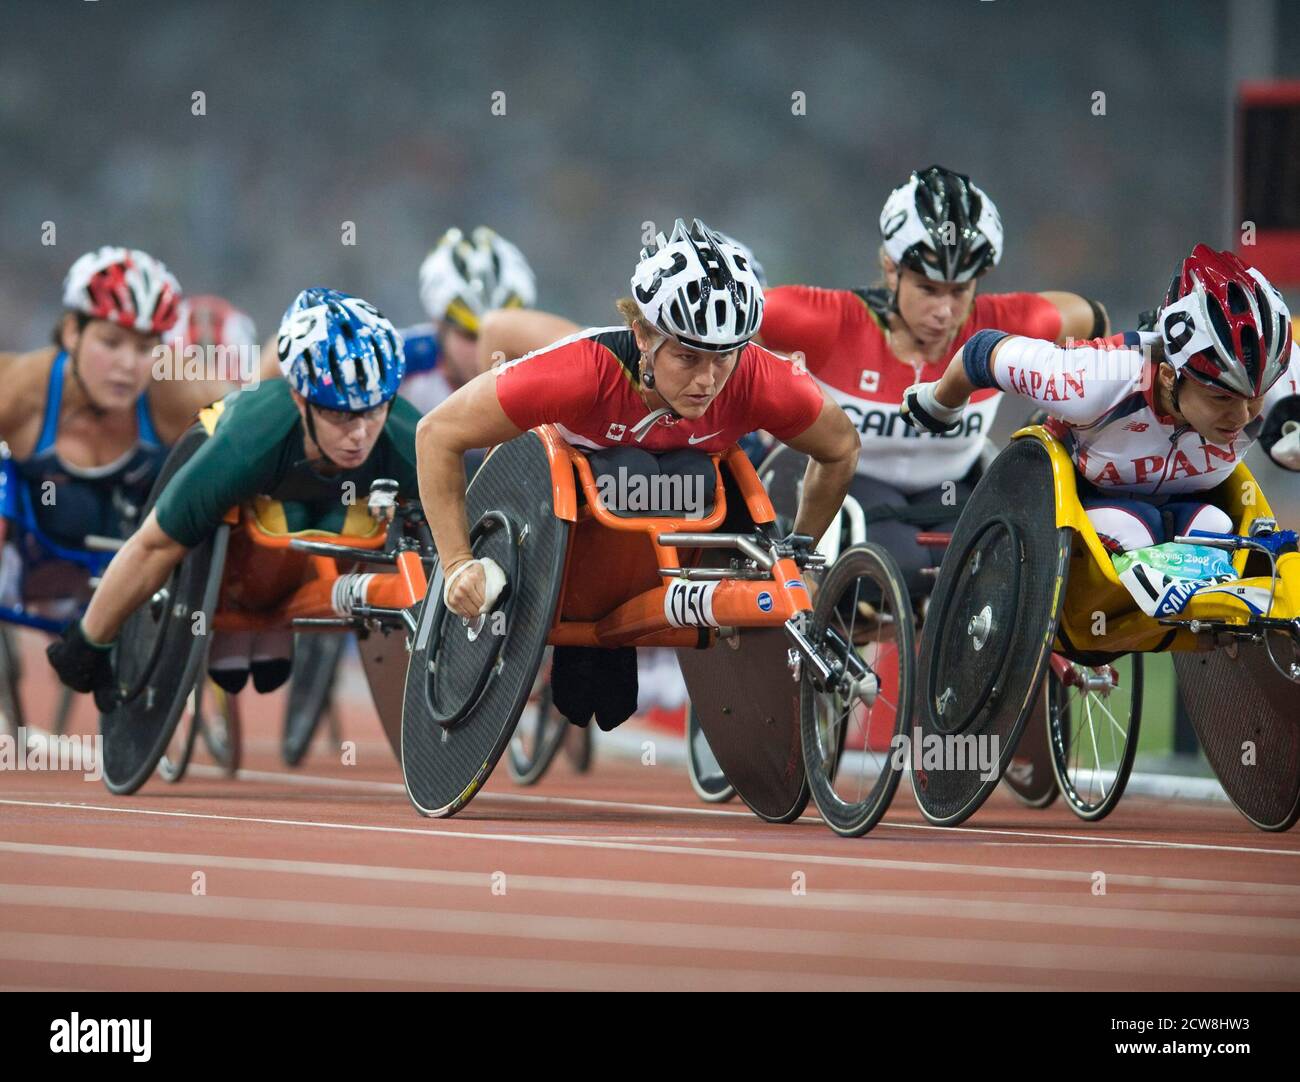 Beijing, China  September 8, 2008: Second day of athletics at the Bird's Nest during the Paralympics. Canada's Diane Roy (1251) leads the pack before winning the women's 5000-meters T54 class in a crash-marred race that saw six competitors not finish.  ©Bob Daemmrich Stock Photo